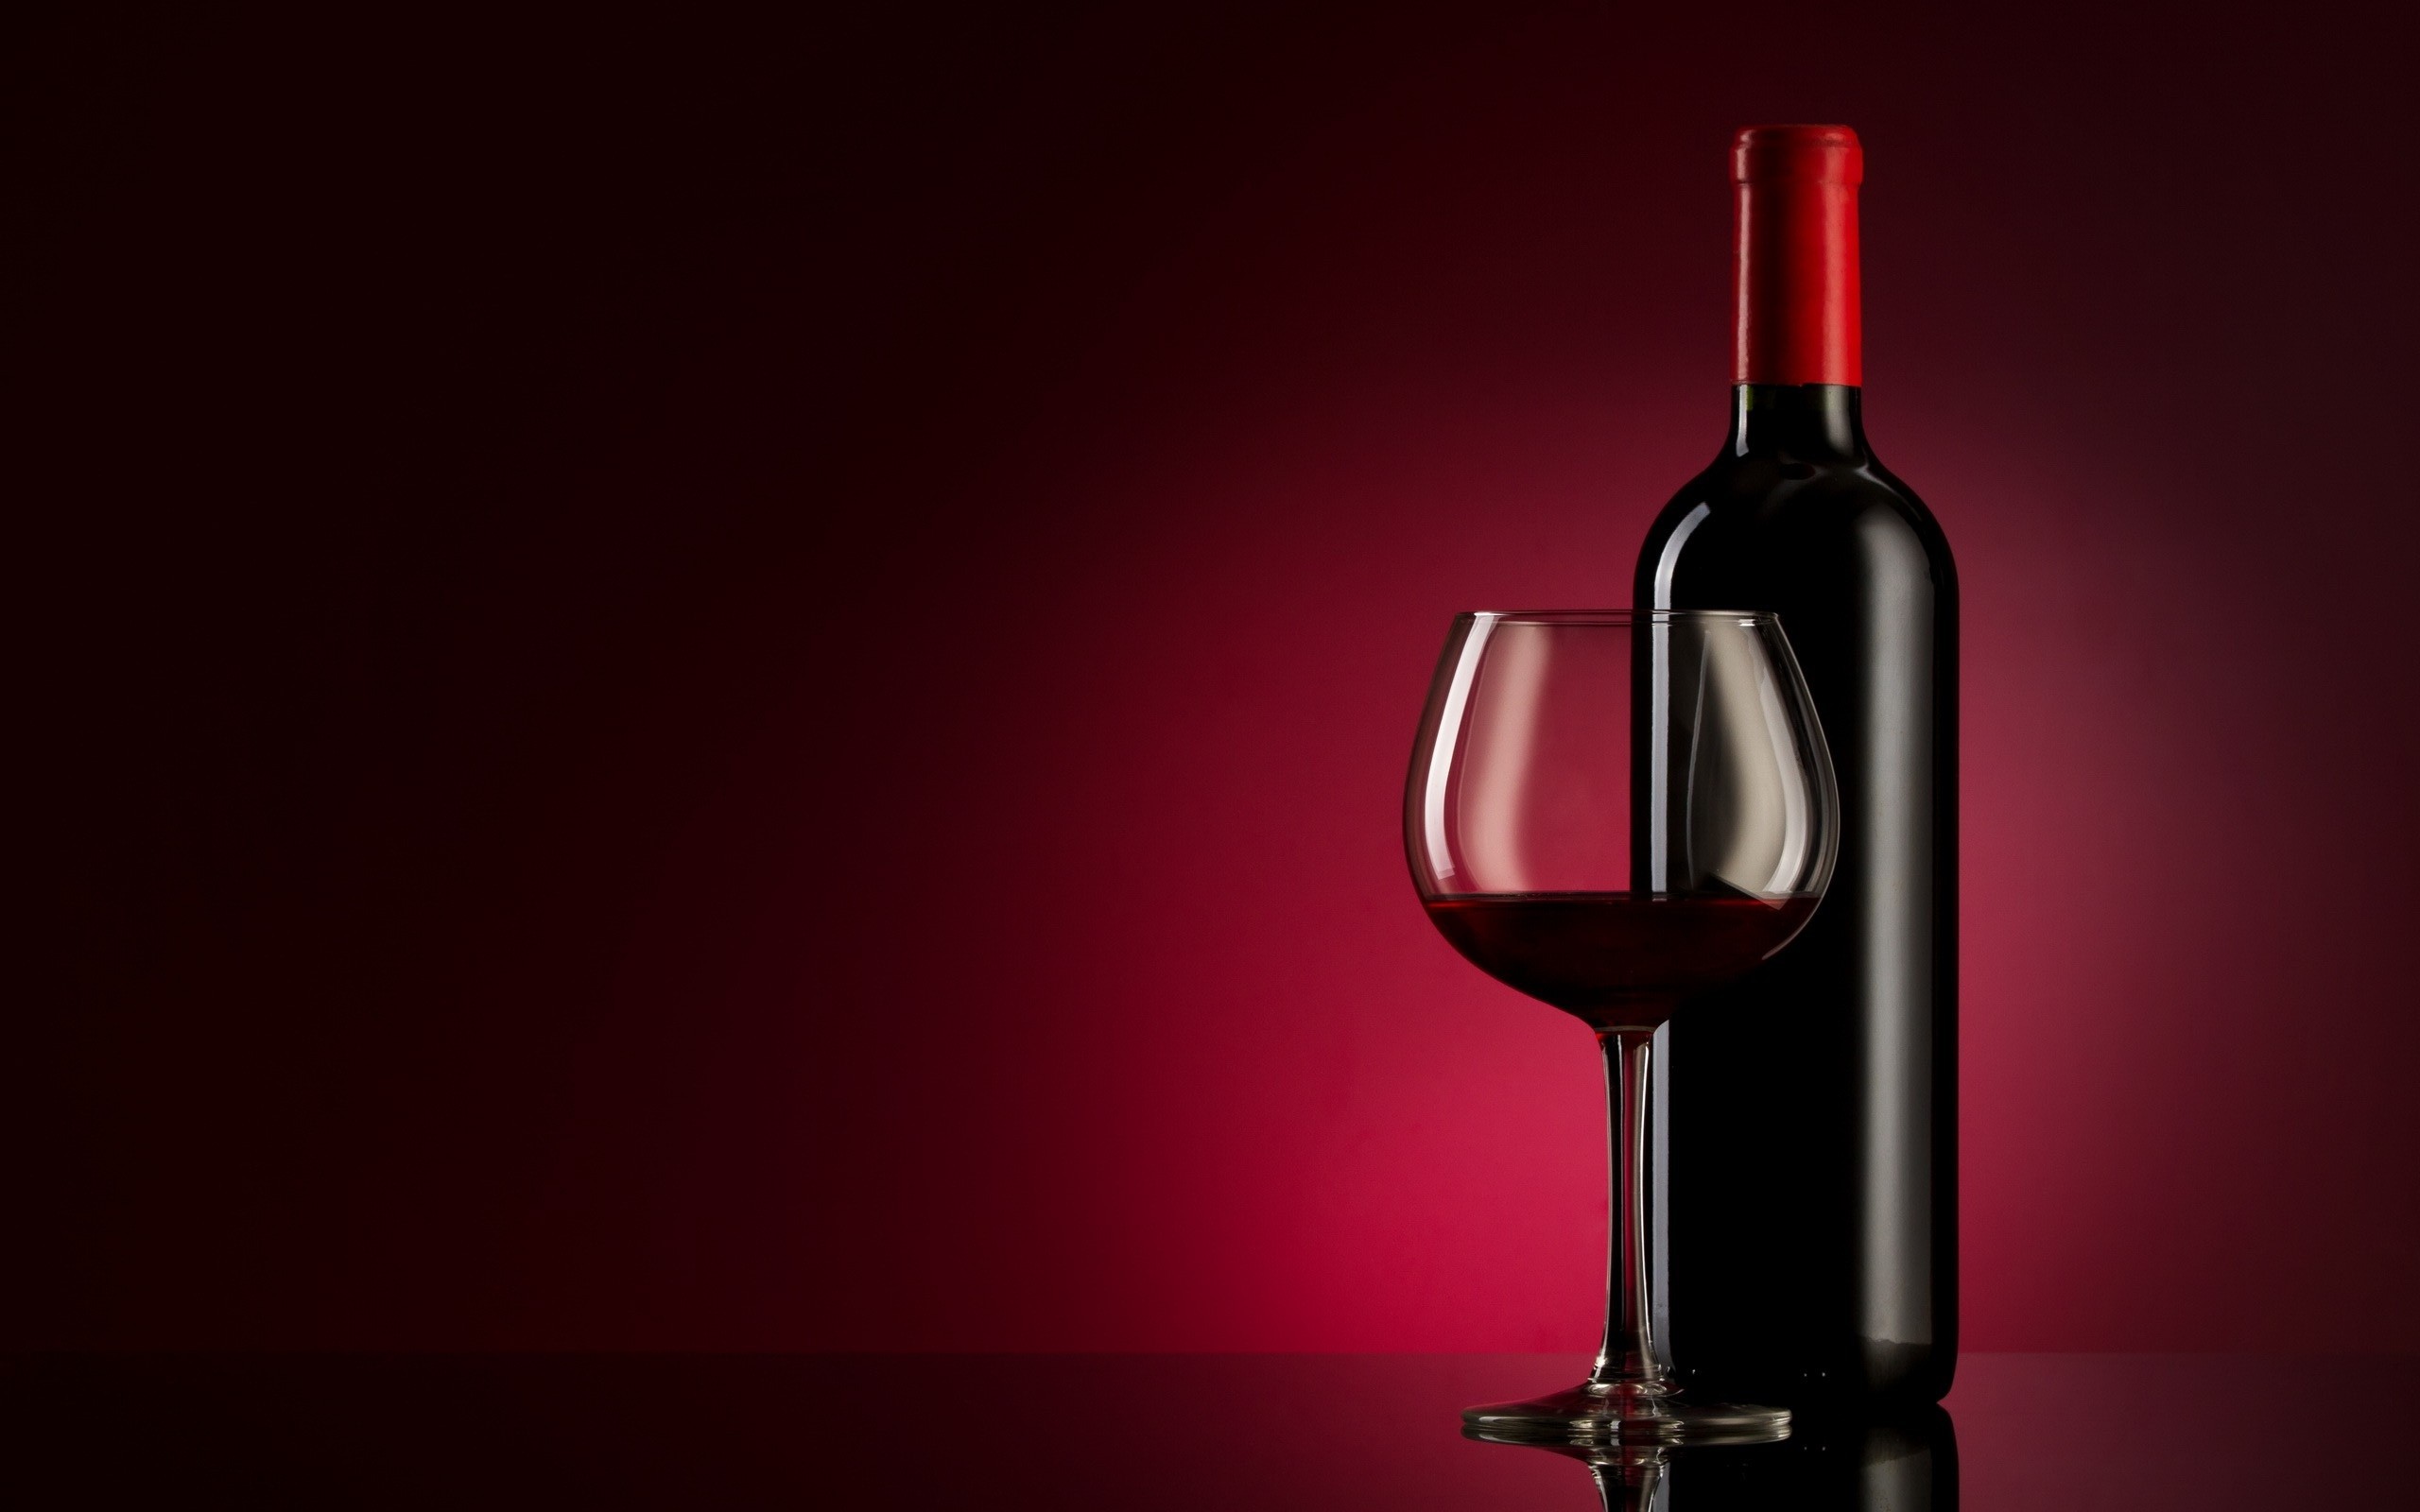 General 2560x1600 minimalism wine red wine drinking glass bottles red background simple background still life